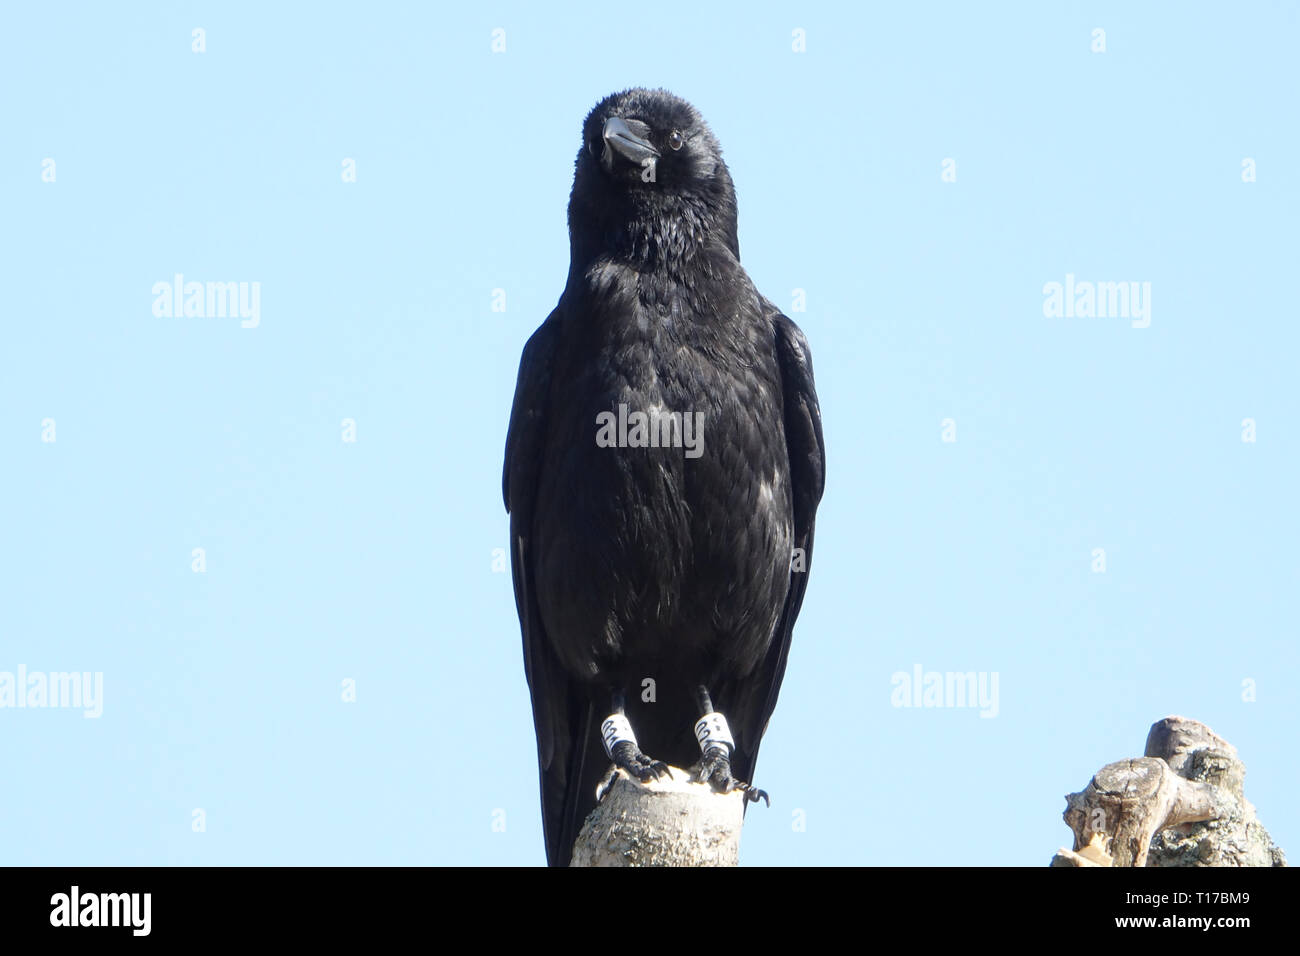 Carrion Crow (Corvus corone)  perched on a tree branch with a blue sky Stock Photo